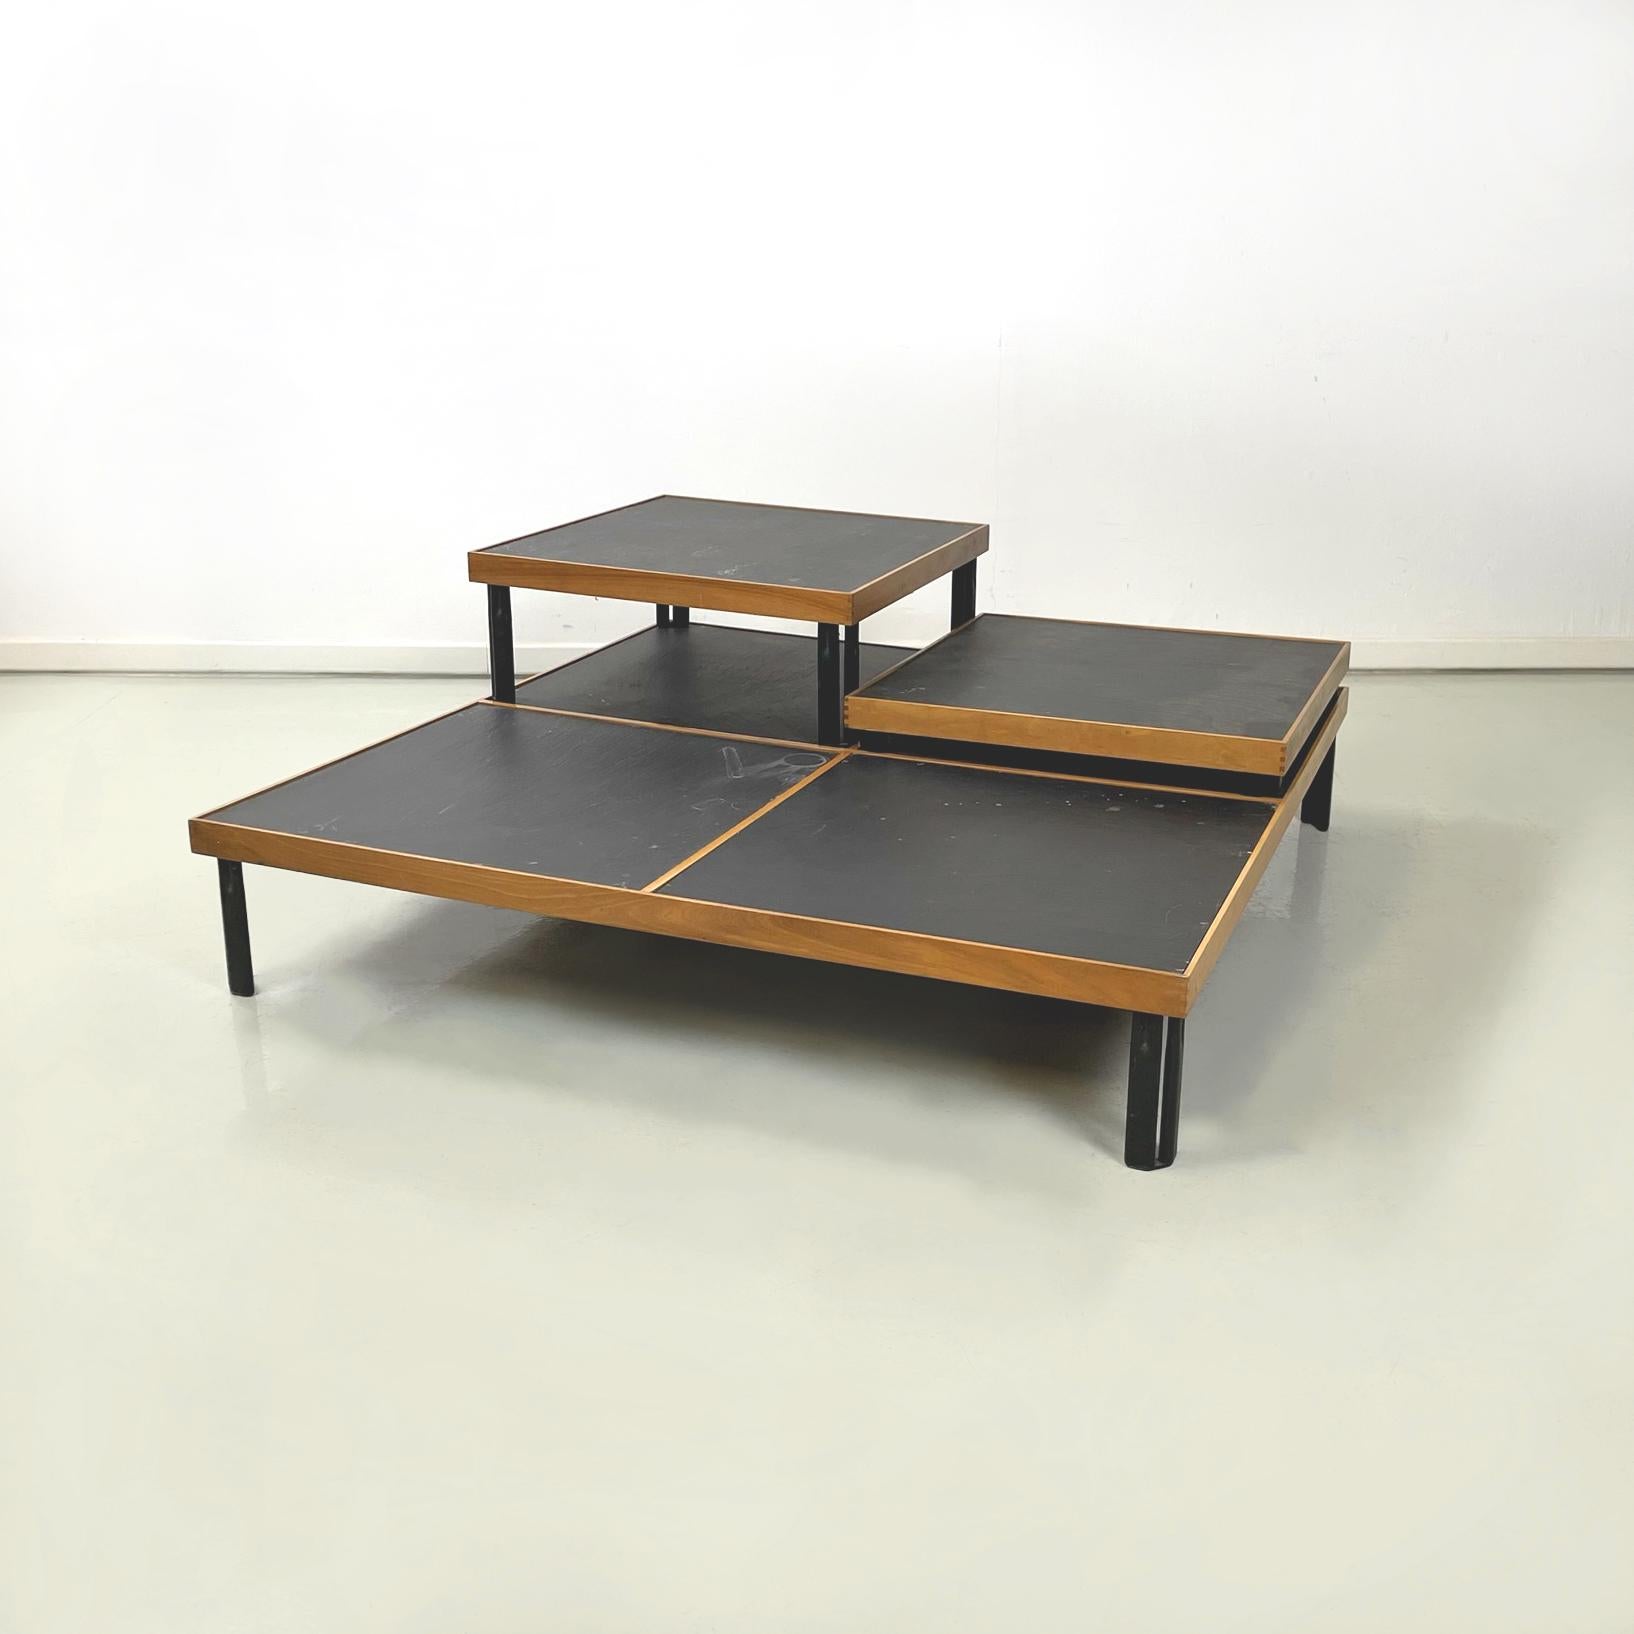 Italian modern Slate, wood and black metal Coffee tables by Piero De Martini for Cassina, 1980s
Set of 3 coffee tables with square top in wood and slate. The top of the two smaller tables have a wooden profile and a slate square in the centre, with